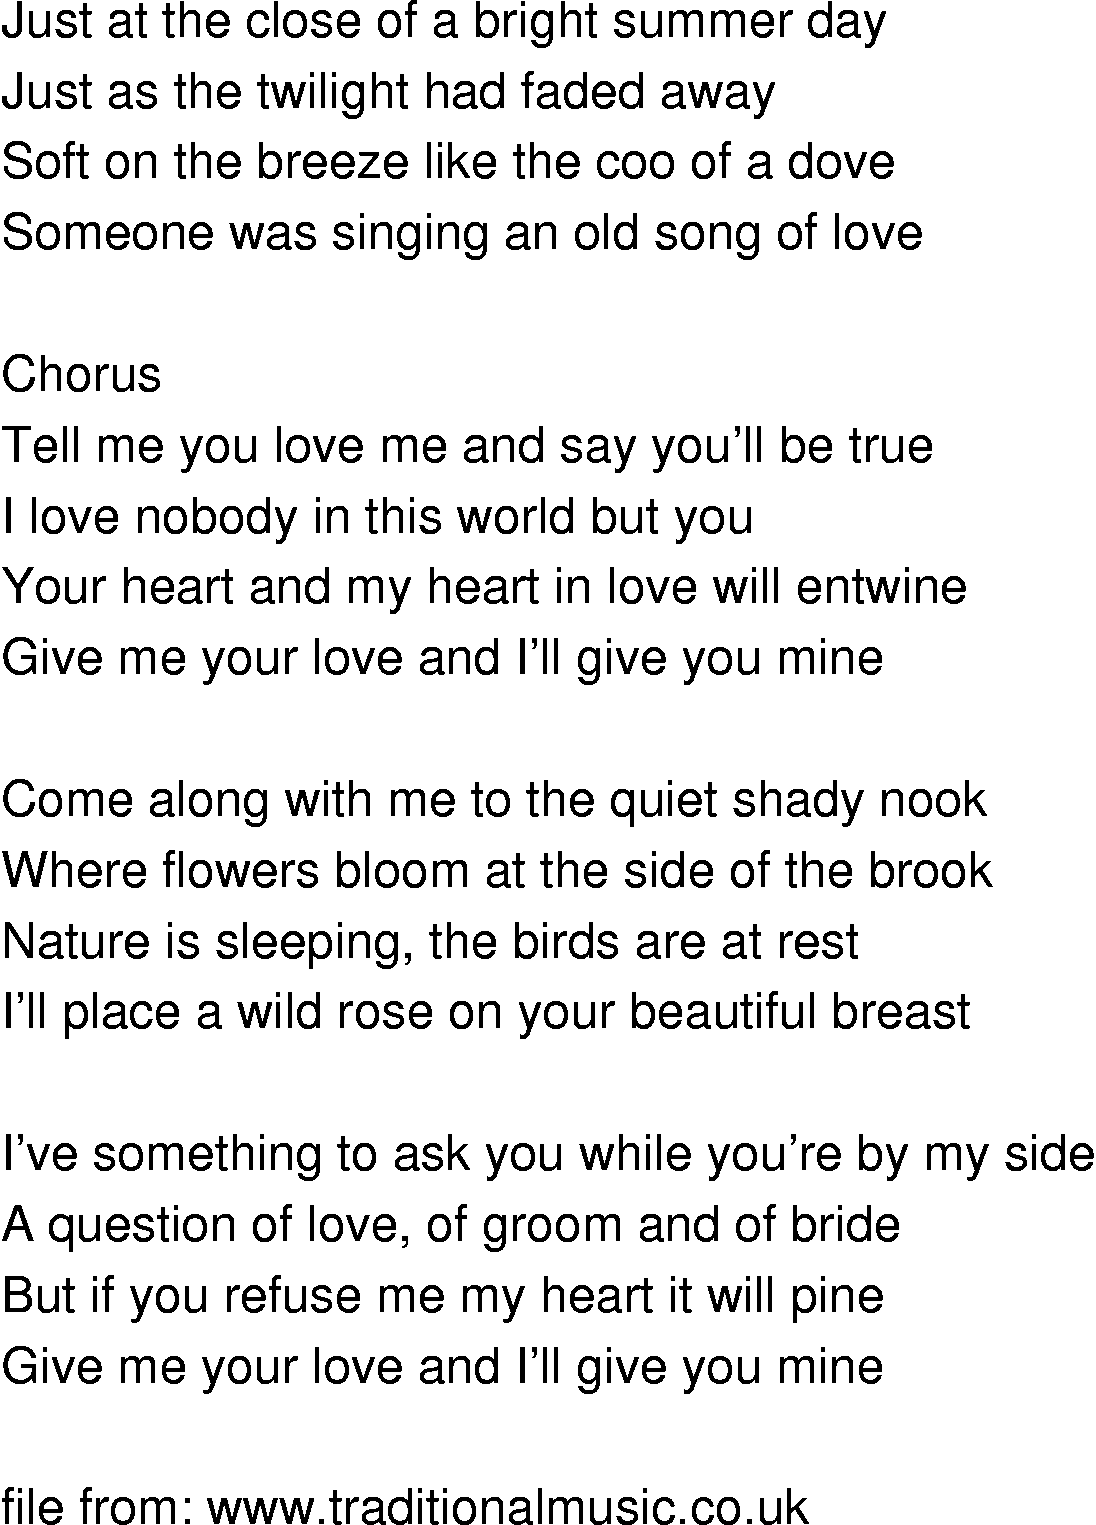 Old-Time (oldtimey) Song Lyrics - give me your love and ill give you mine